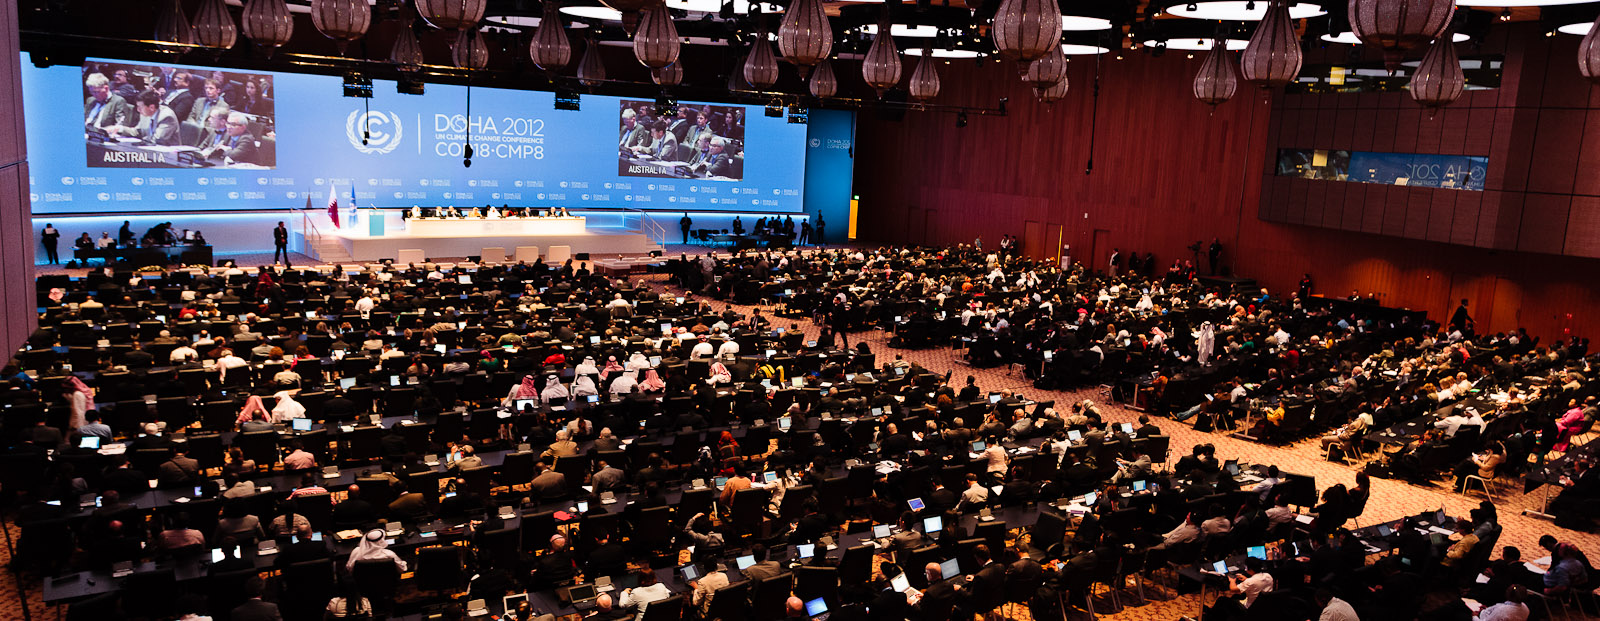 Image of the 2012 UN Climate Change Conference in Doha